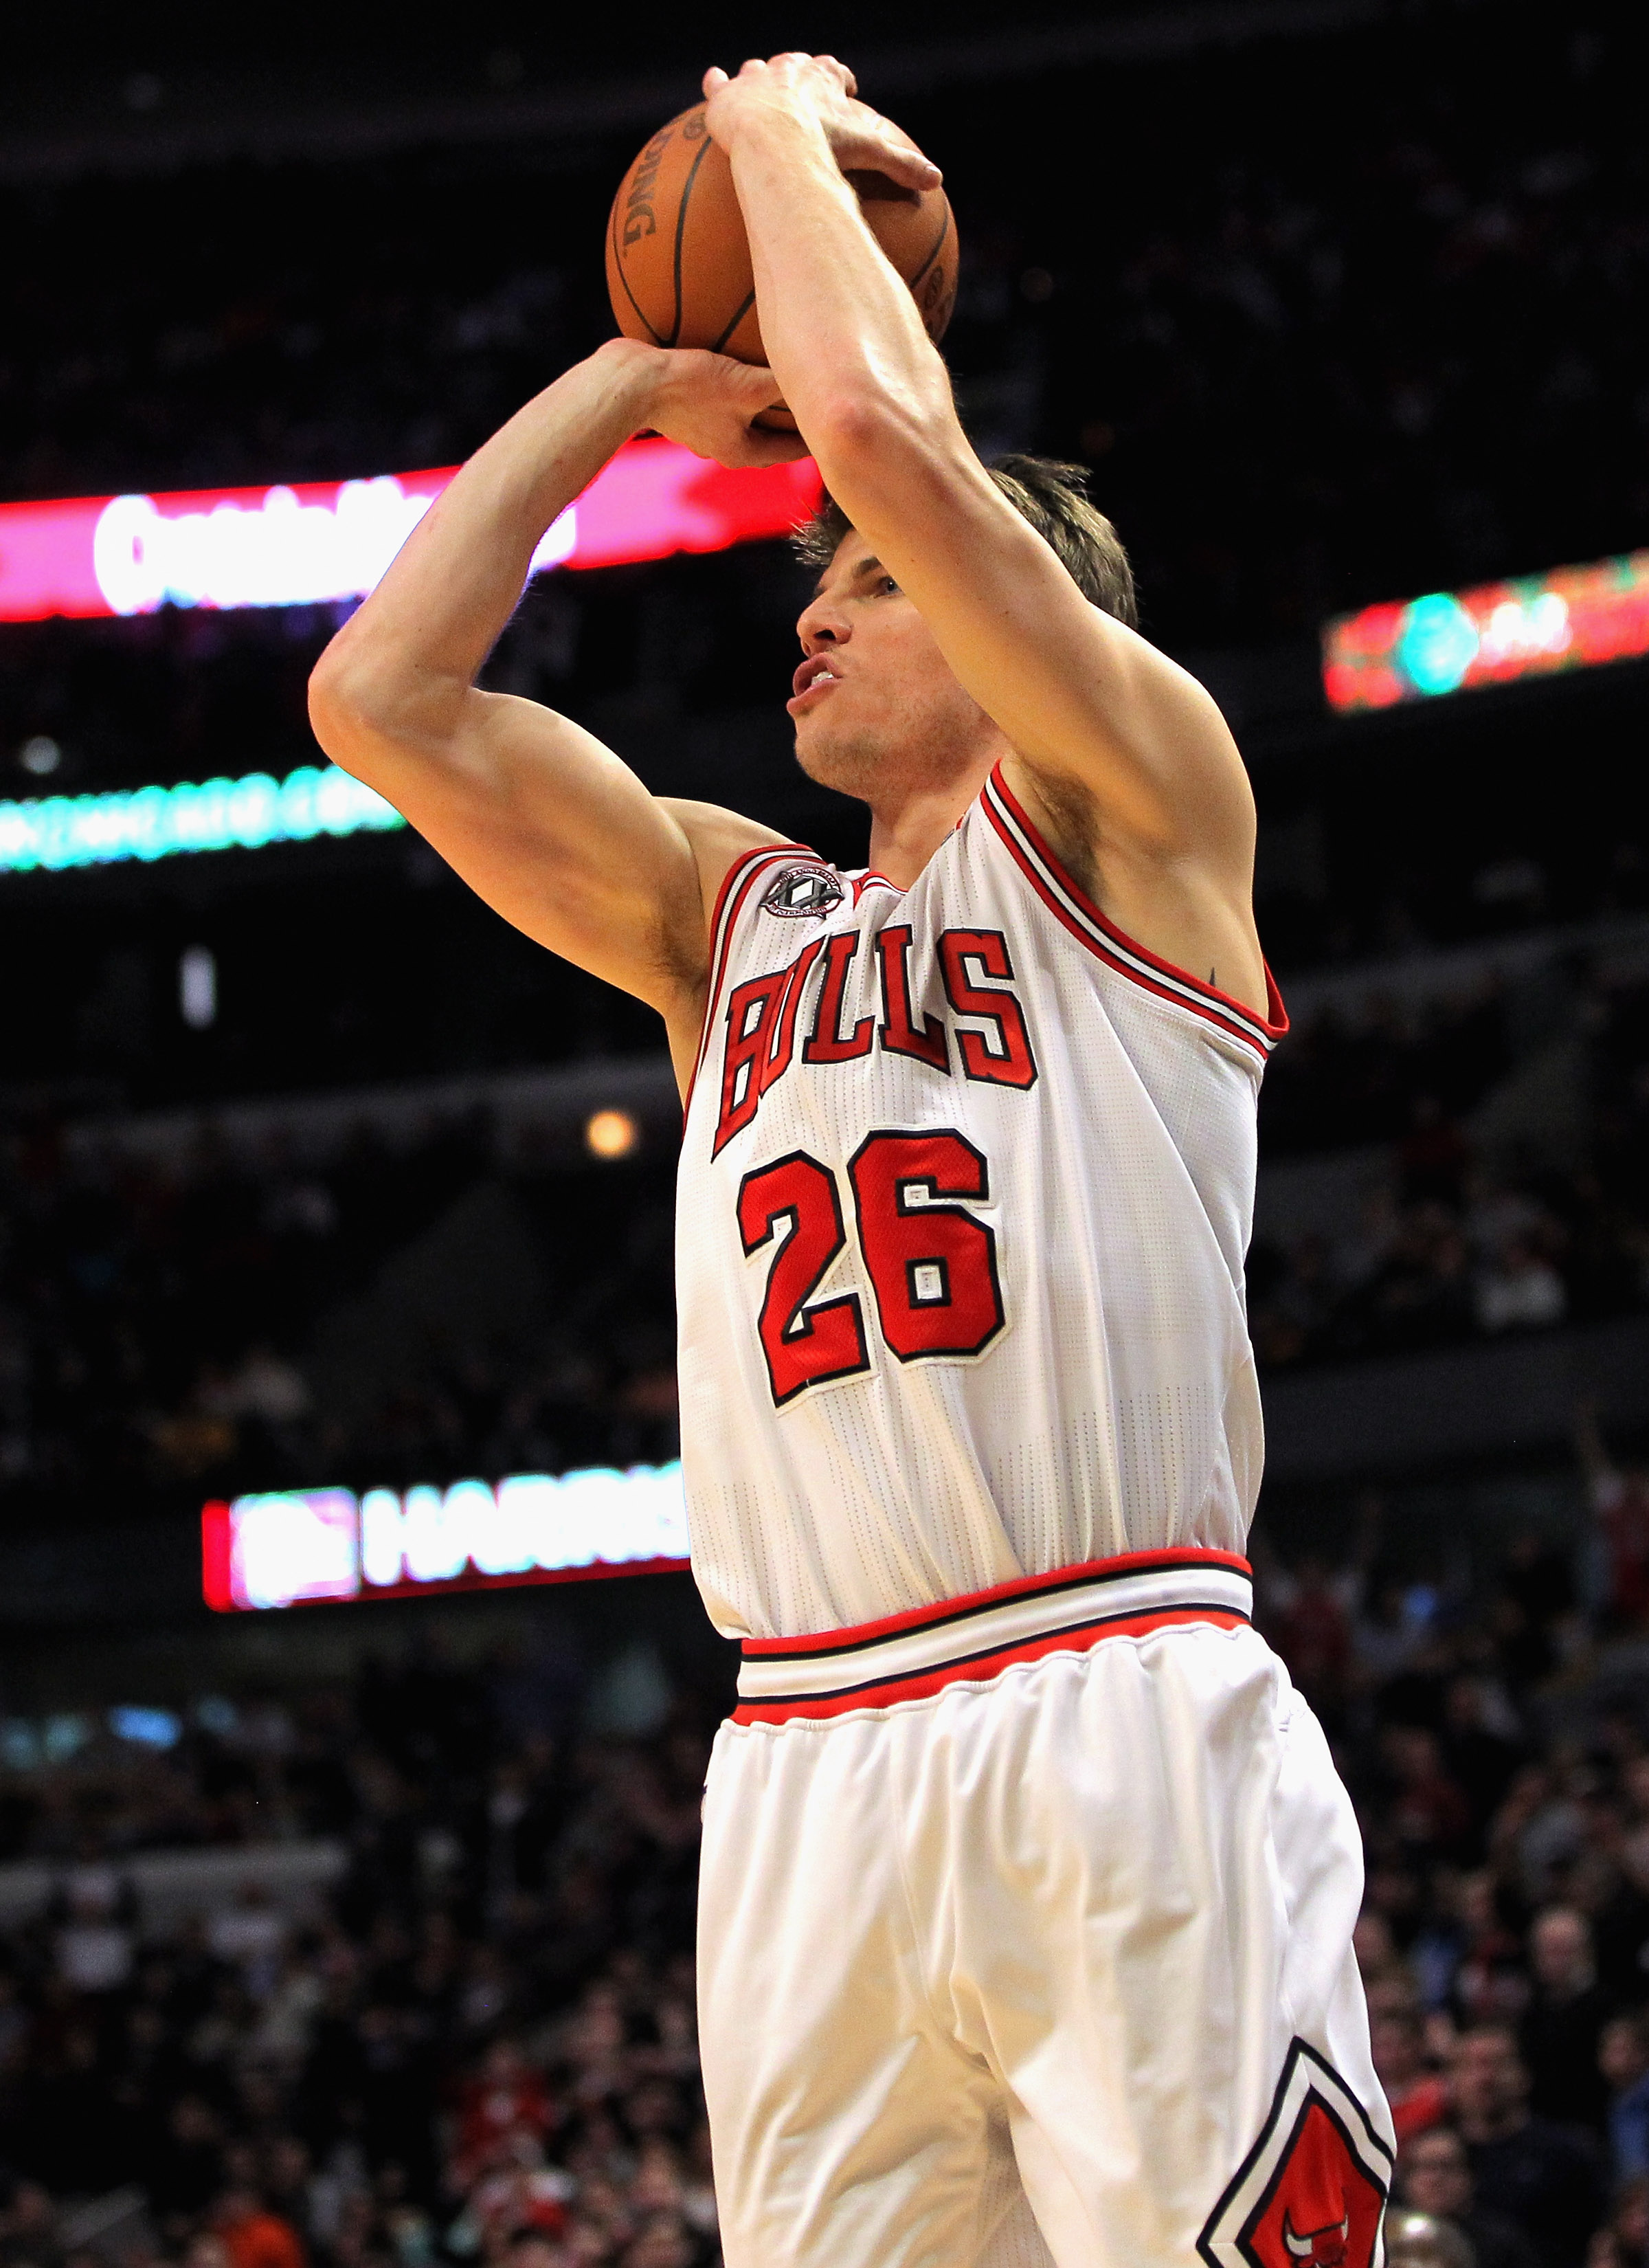 CHICAGO, IL - JANUARY 15:  Kyle Korver #26 of the Chicago Bulls sinks the game winning three point shot with 25 seconds remaining in the game against the Miami Heat at the United Center on January 15, 2011 in Chicago, Illinois. The Bulls defeated the Heat